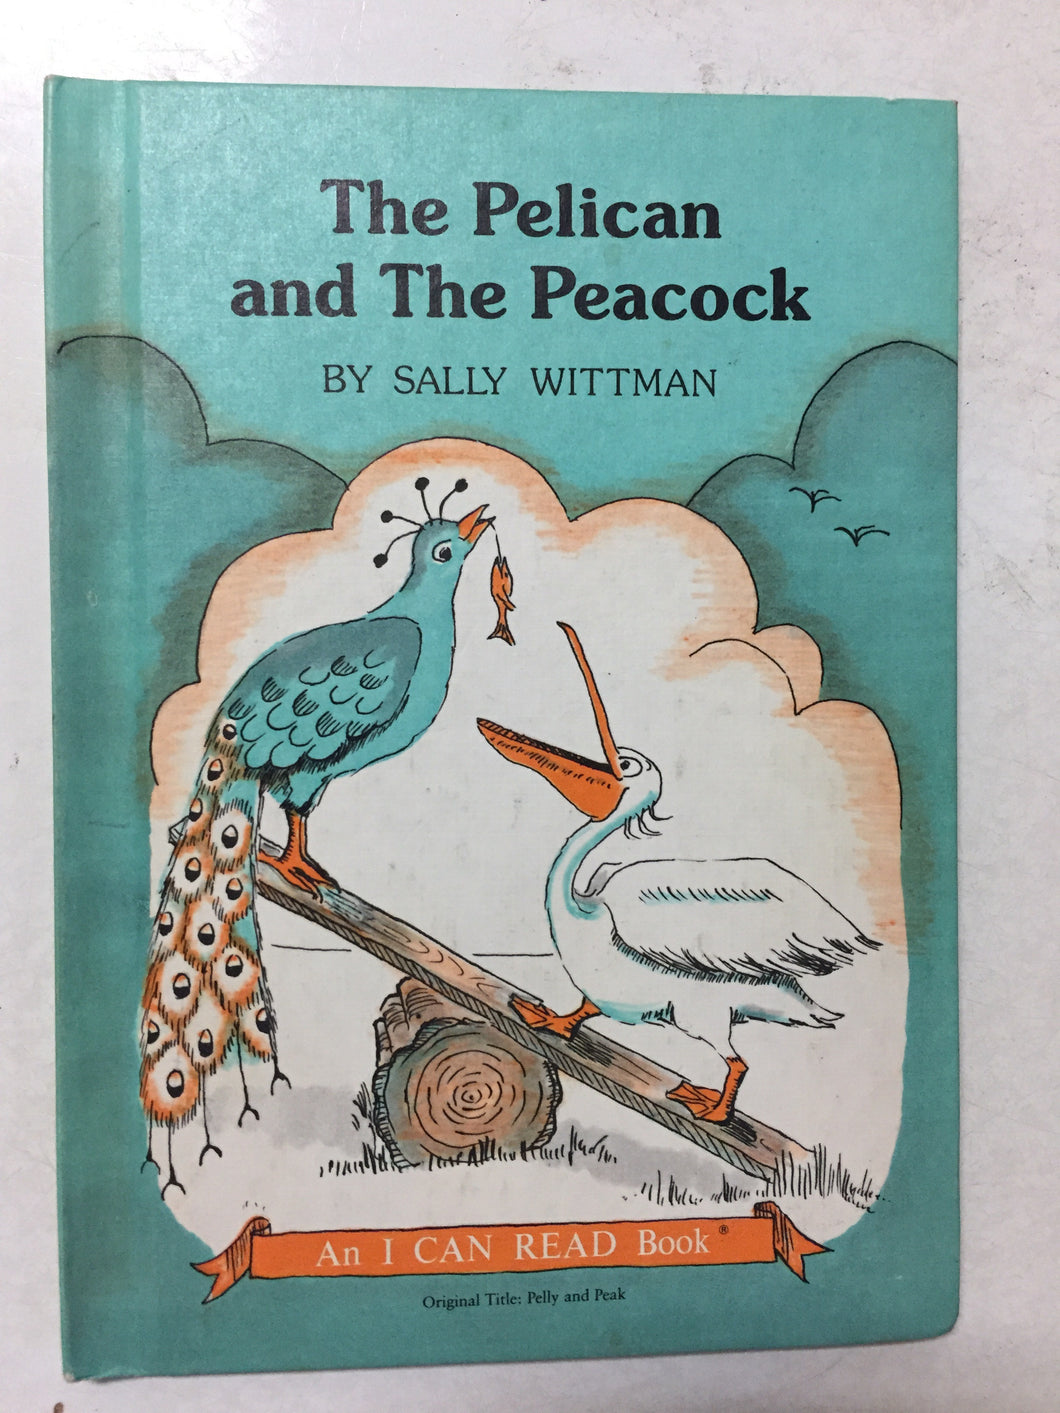 The Pelican and The Peacock - Slickcatbooks